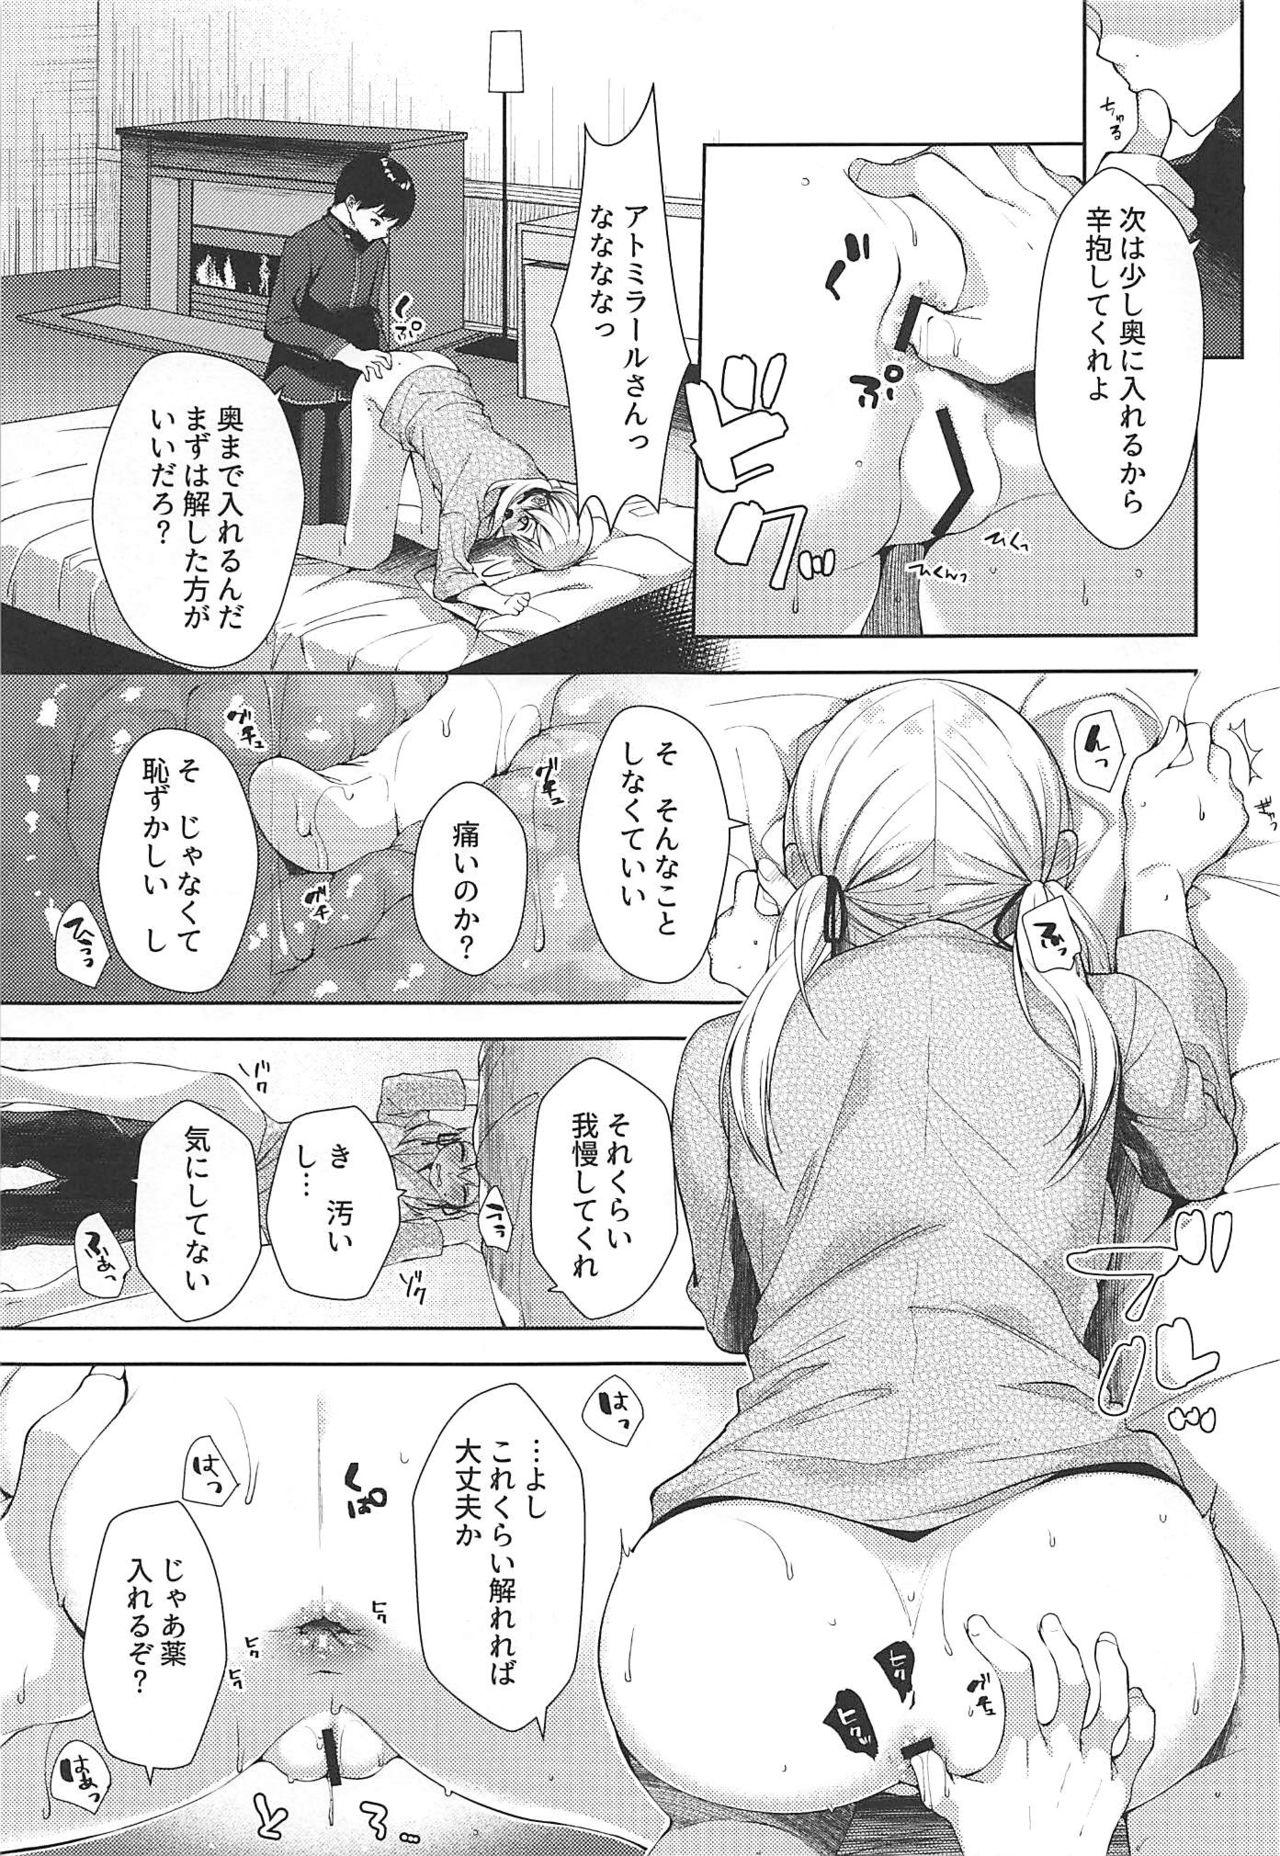 Toys +1°C - Kantai collection Pierced - Page 6